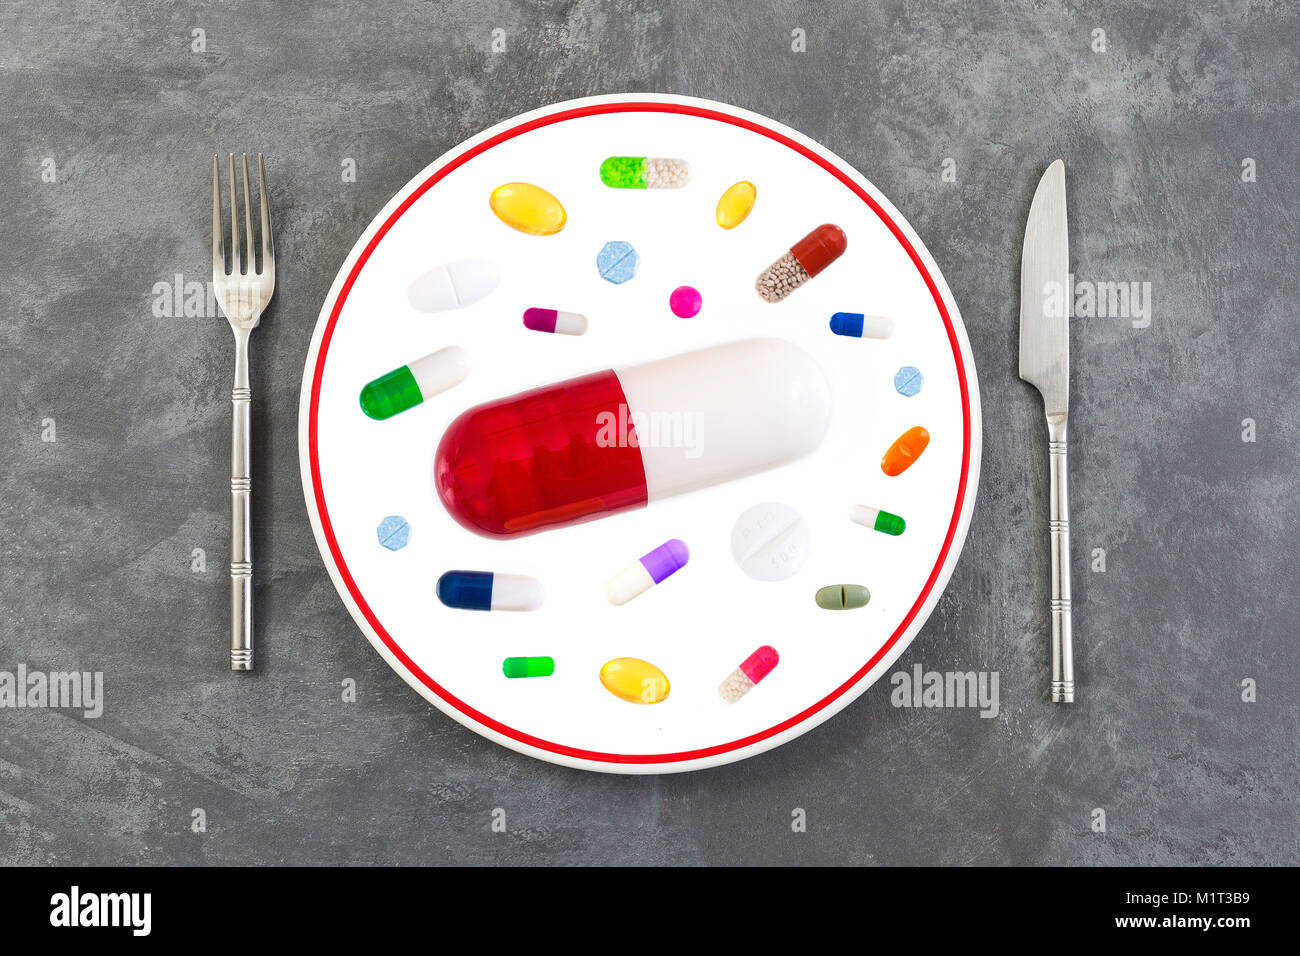 large sized red pill on a plate with silverware, in the middle of colorful medicine on grey slate background Stock Photo